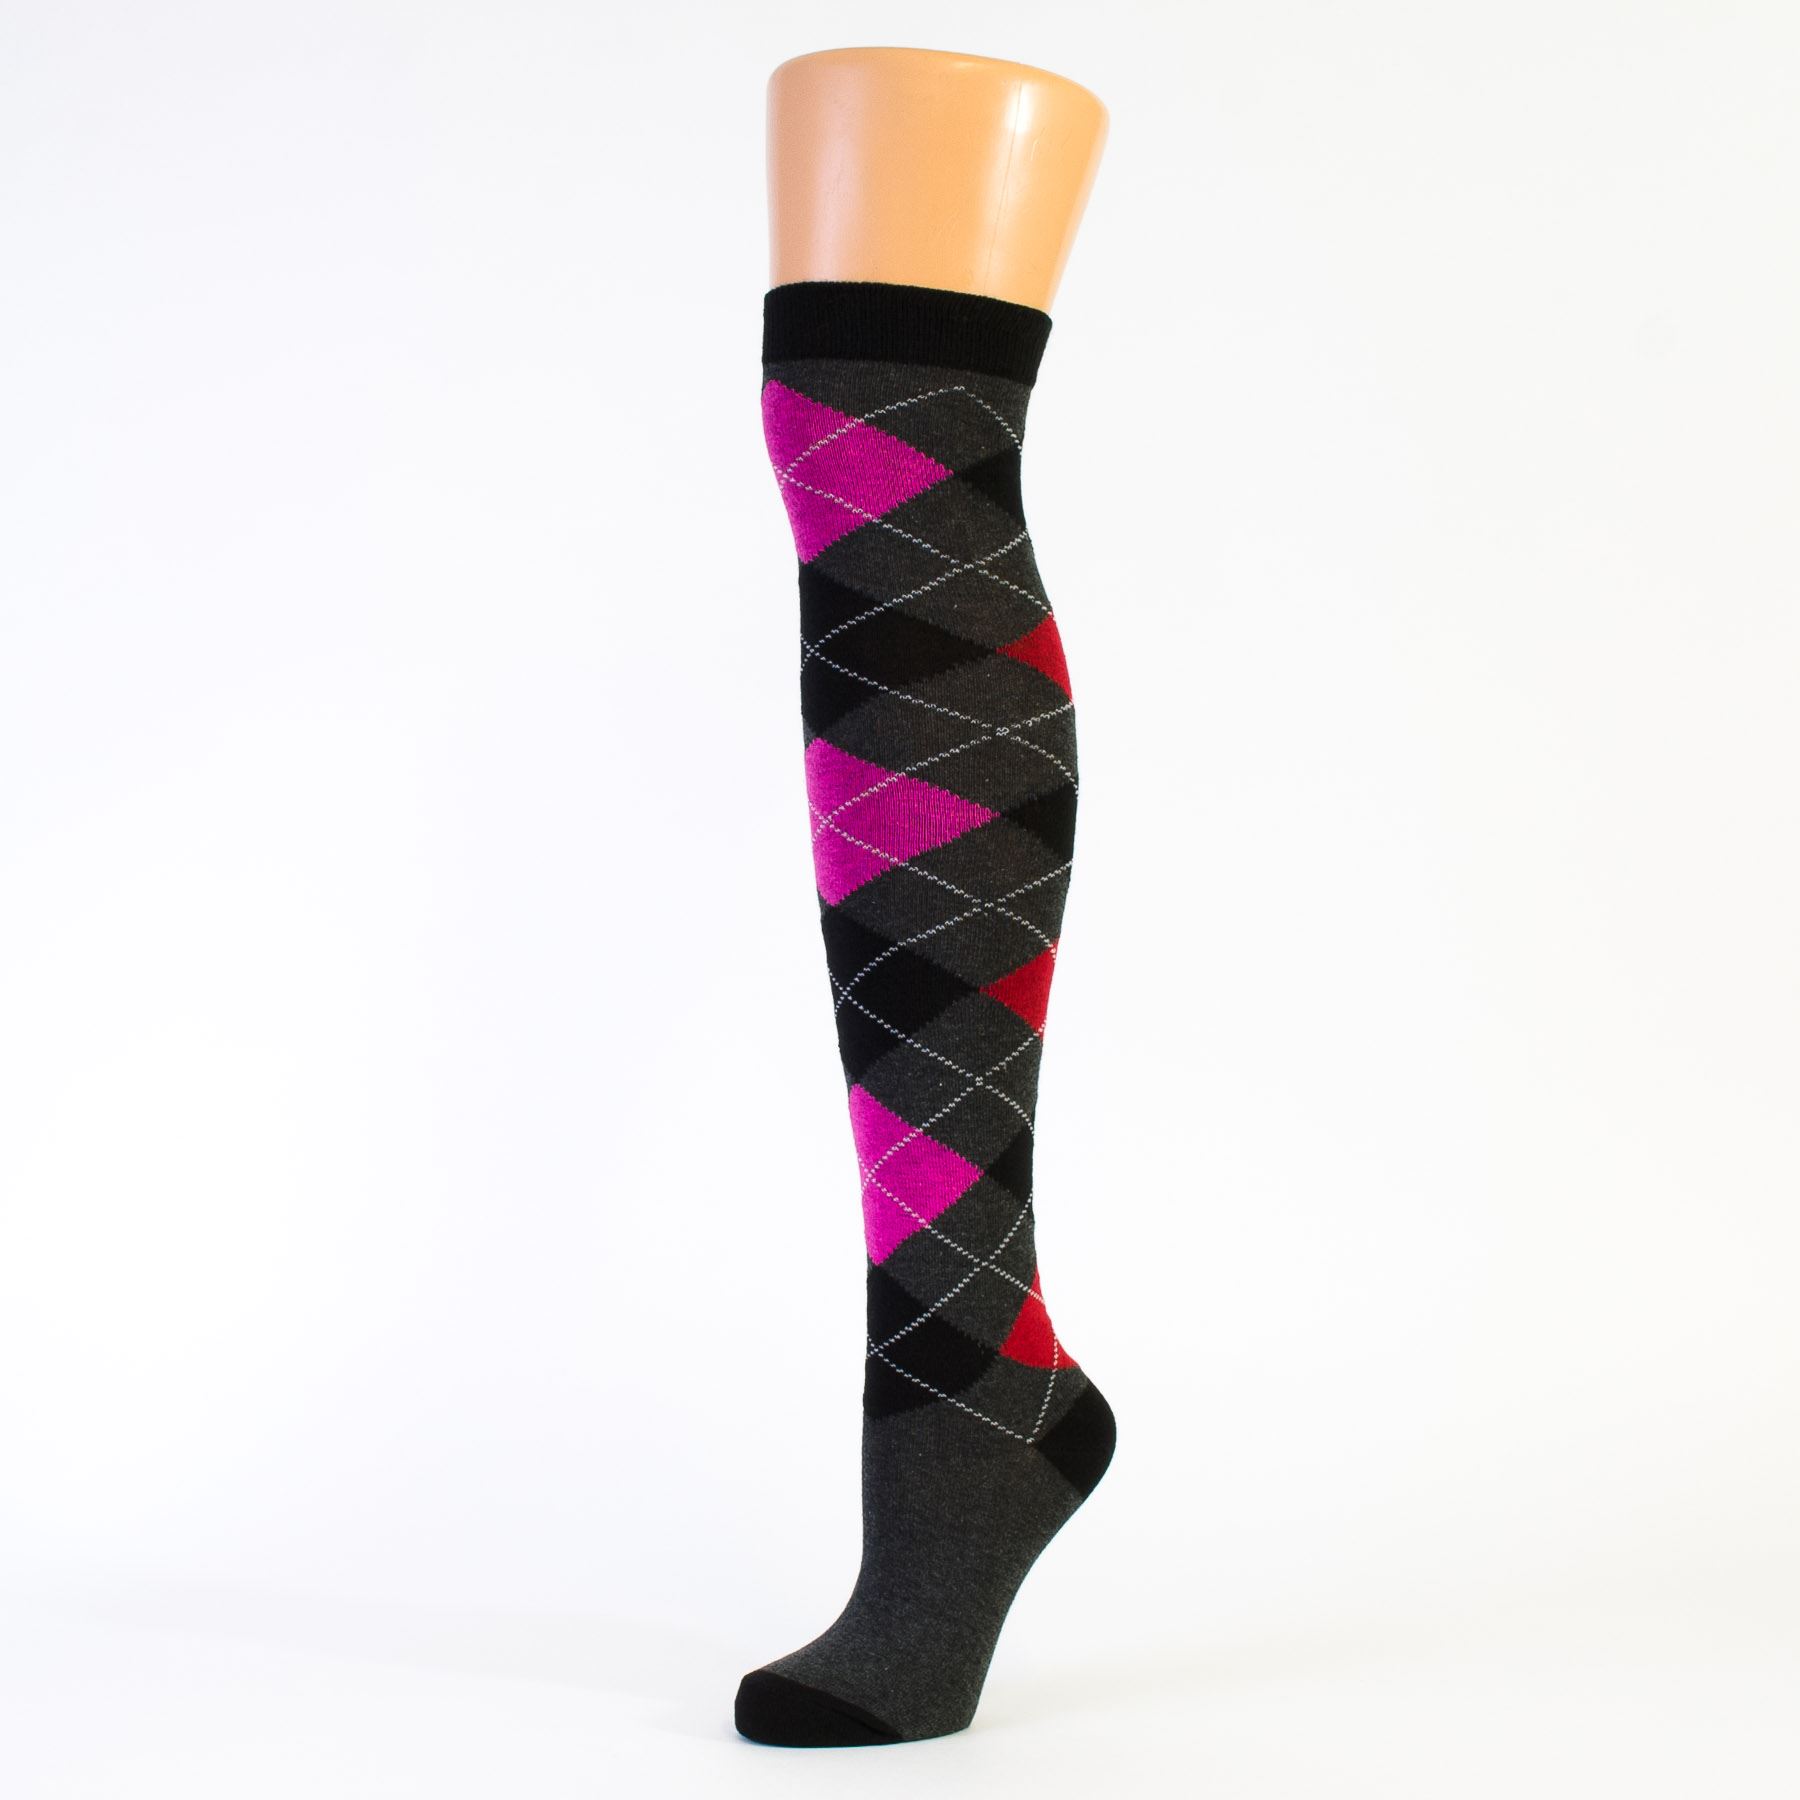 Cannon reccomend getting some argyle knee highs